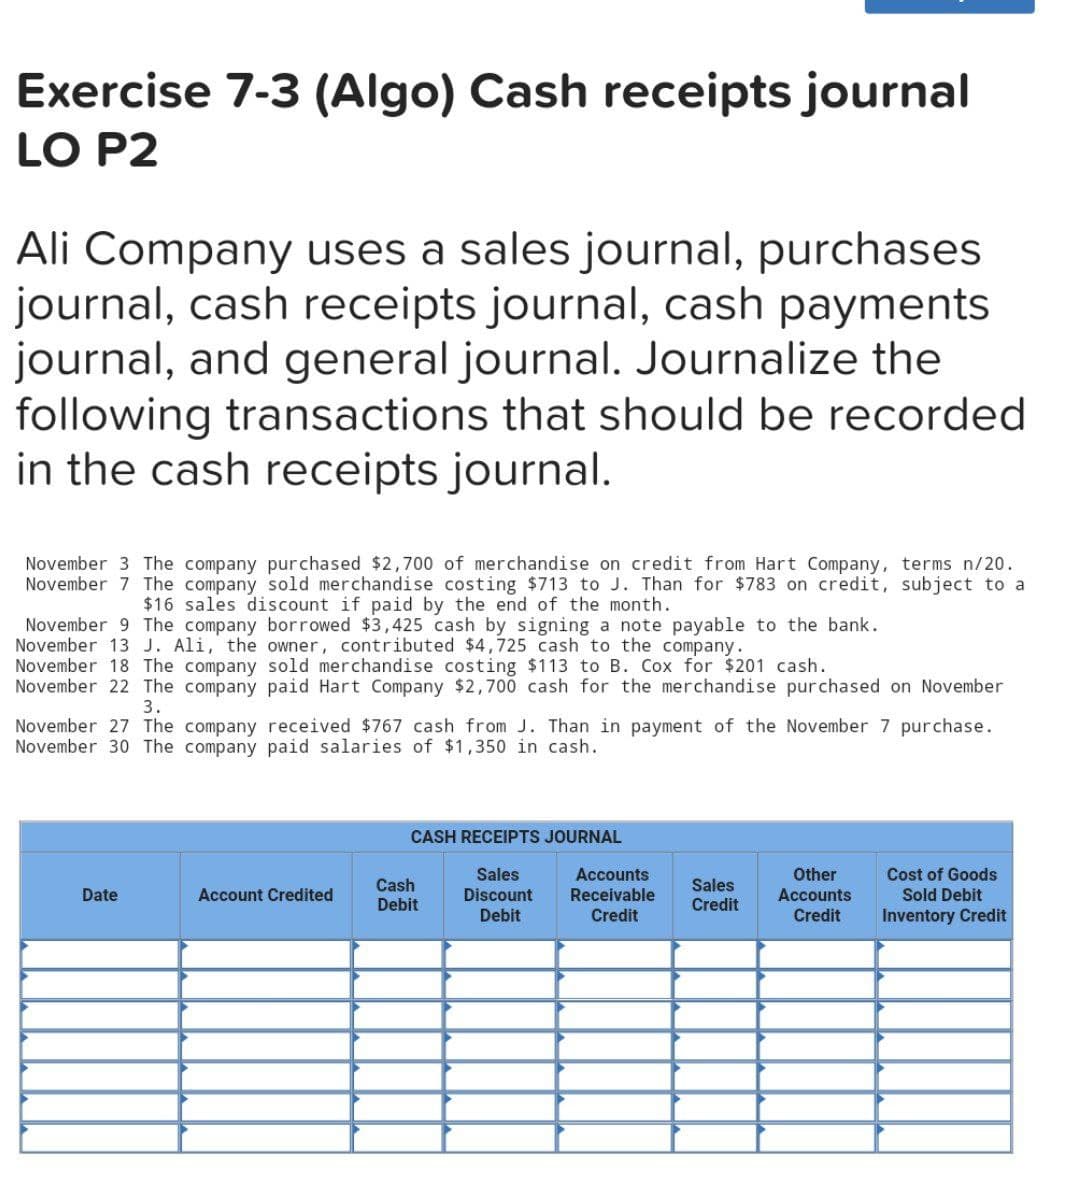 Exercise 7-3 (Algo) Cash receipts journal
LO P2
Ali Company uses a sales journal, purchases
journal, cash receipts journal, cash payments
journal, and general journal. Journalize the
following transactions that should be recorded
in the cash receipts journal.
November 3 The company purchased $2,700 of merchandise on credit from Hart Company, terms n/20.
November 7 The company sold merchandise costing $713 to J. Than for $783 on credit, subject to a
$16 sales discount if paid by the end of the month.
November 9 The company borrowed $3,425 cash by signing a note payable to the bank.
November 13 J. Ali, the owner, contributed $4,725 cash to the company.
November 18 The company sold merchandise costing $113 to B. Cox for $201 cash.
November 22 The company paid Hart Company $2,700 cash for the merchandise purchased on November
3.
November 27 The company received $767 cash from J. Than in payment of the November 7 purchase.
November 30 The company paid salaries of $1,350 in cash.
Date
Account Credited
CASH RECEIPTS JOURNAL
Sales
Discount
Debit
Cash
Debit
Acco
Receivable
Credit
Sales
Credit
Accounts
Credit
Cost Good
Sold Debit
Inventory Credit